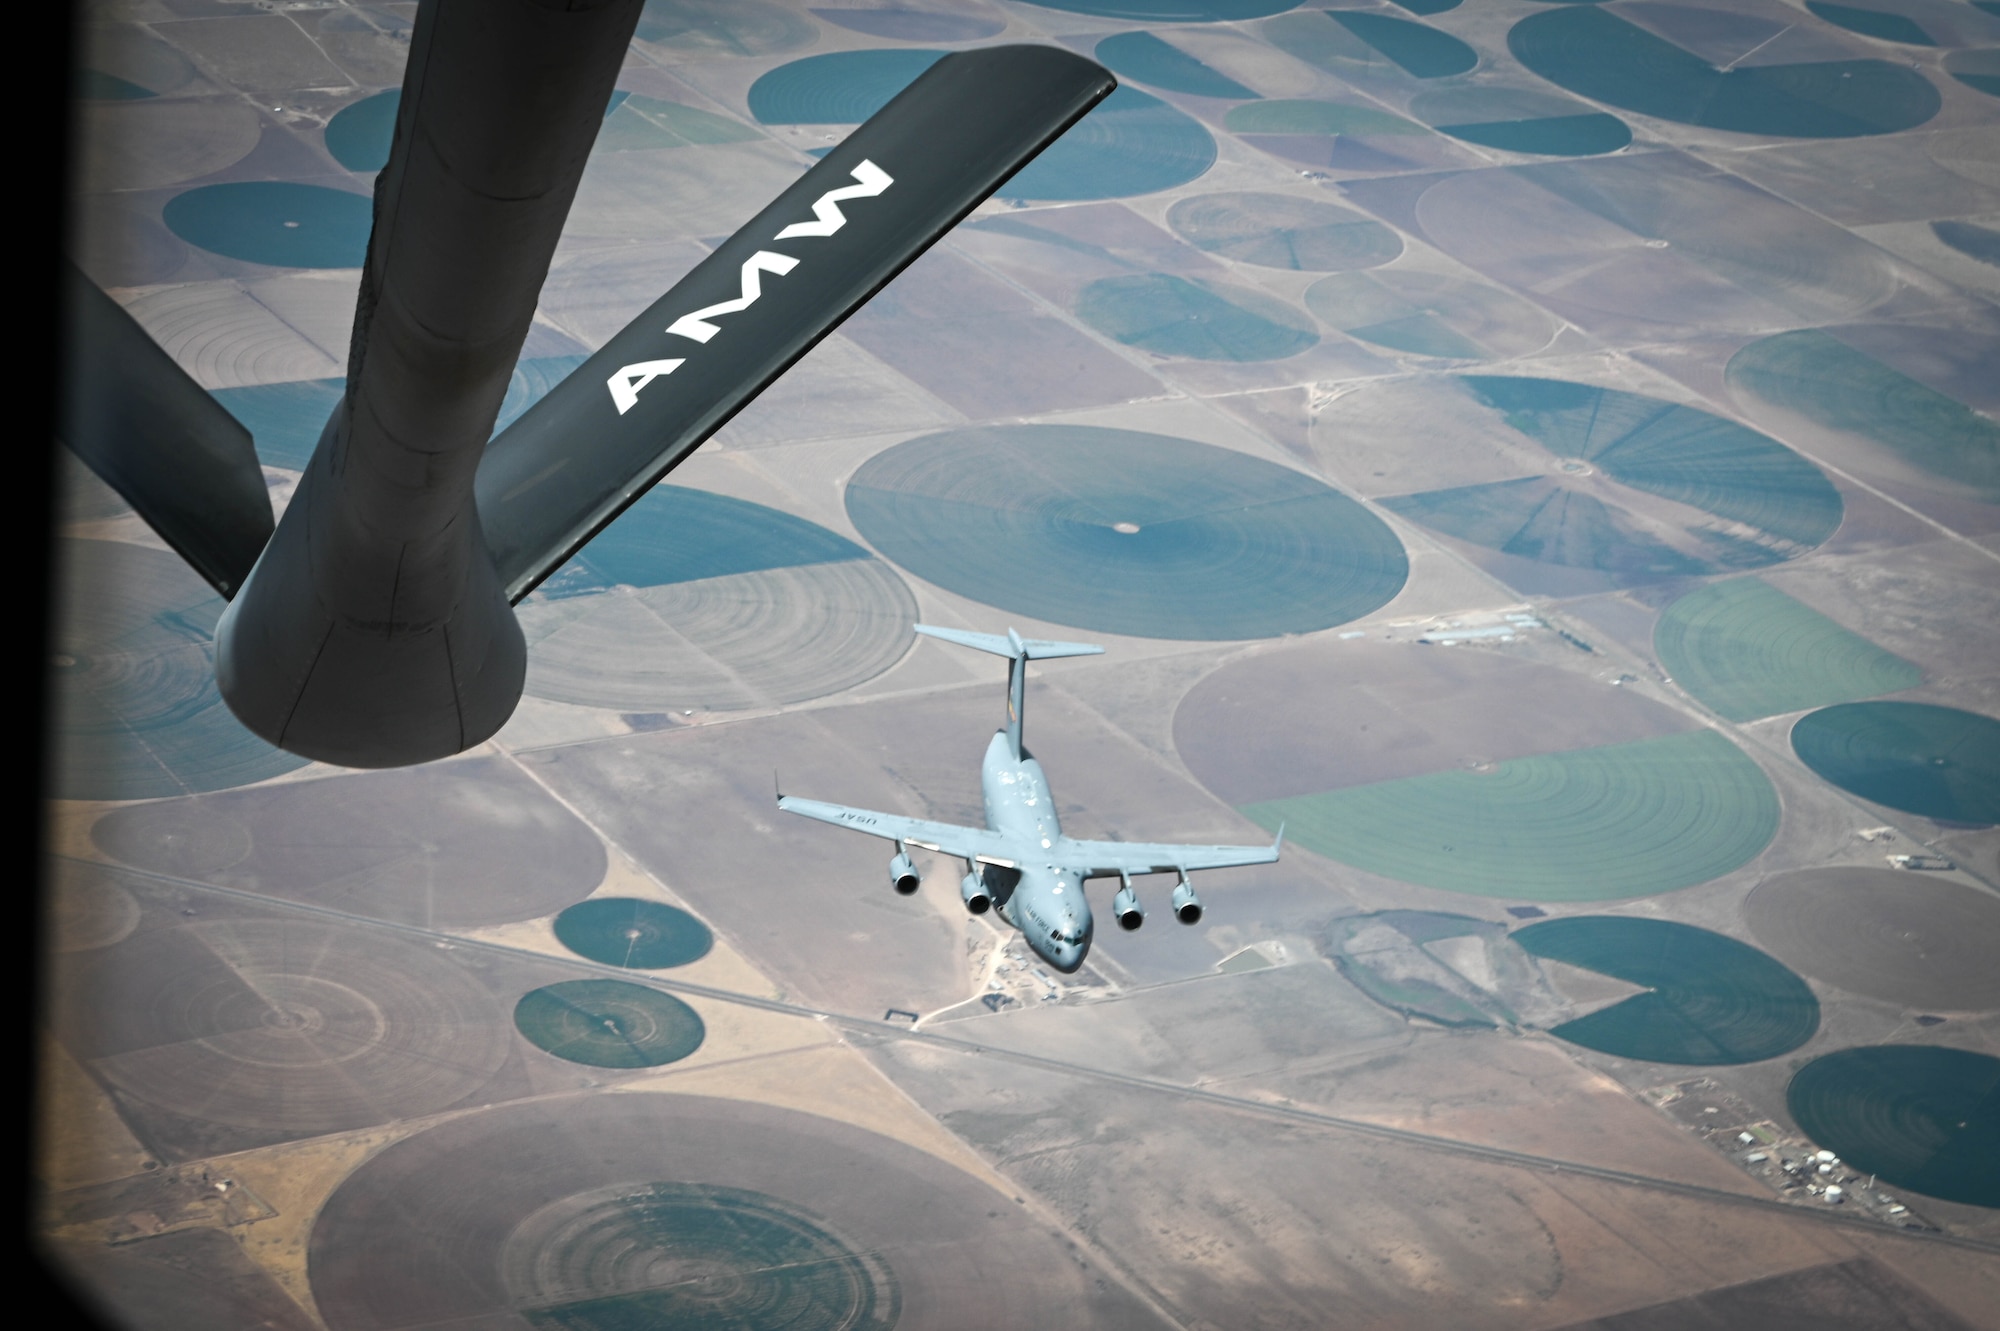 A C-17 Globemaster III departs after receiving air refueling during Task Force Red Mammoth, April 27, 2022. Red Mammoth featured training between all three Altus Air Force Base, Oklahoma, aircraft: the C-17, KC-46 Pegasus, and KC-135 Stratotanker. (U.S. Air Force photo by Senior Airman Kayla Christenson)